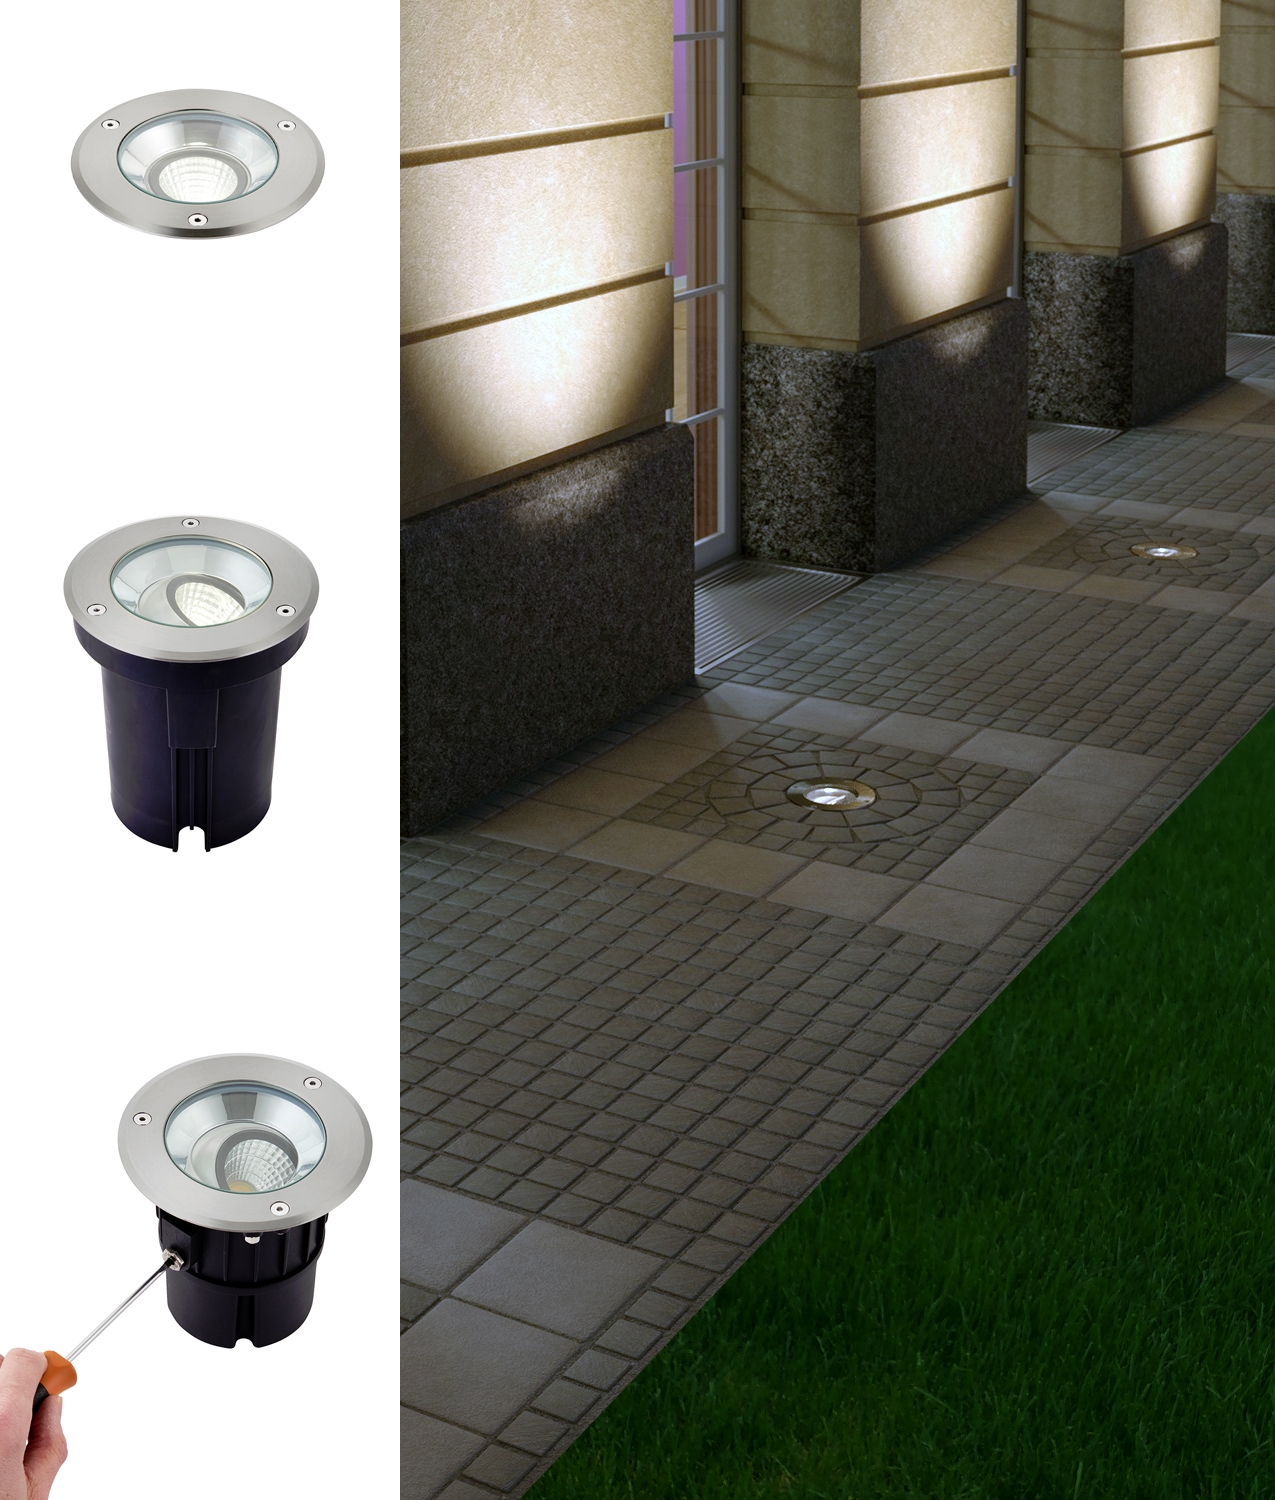 LED Recessed Ground Uplight - Larger Size For Facade Lighting